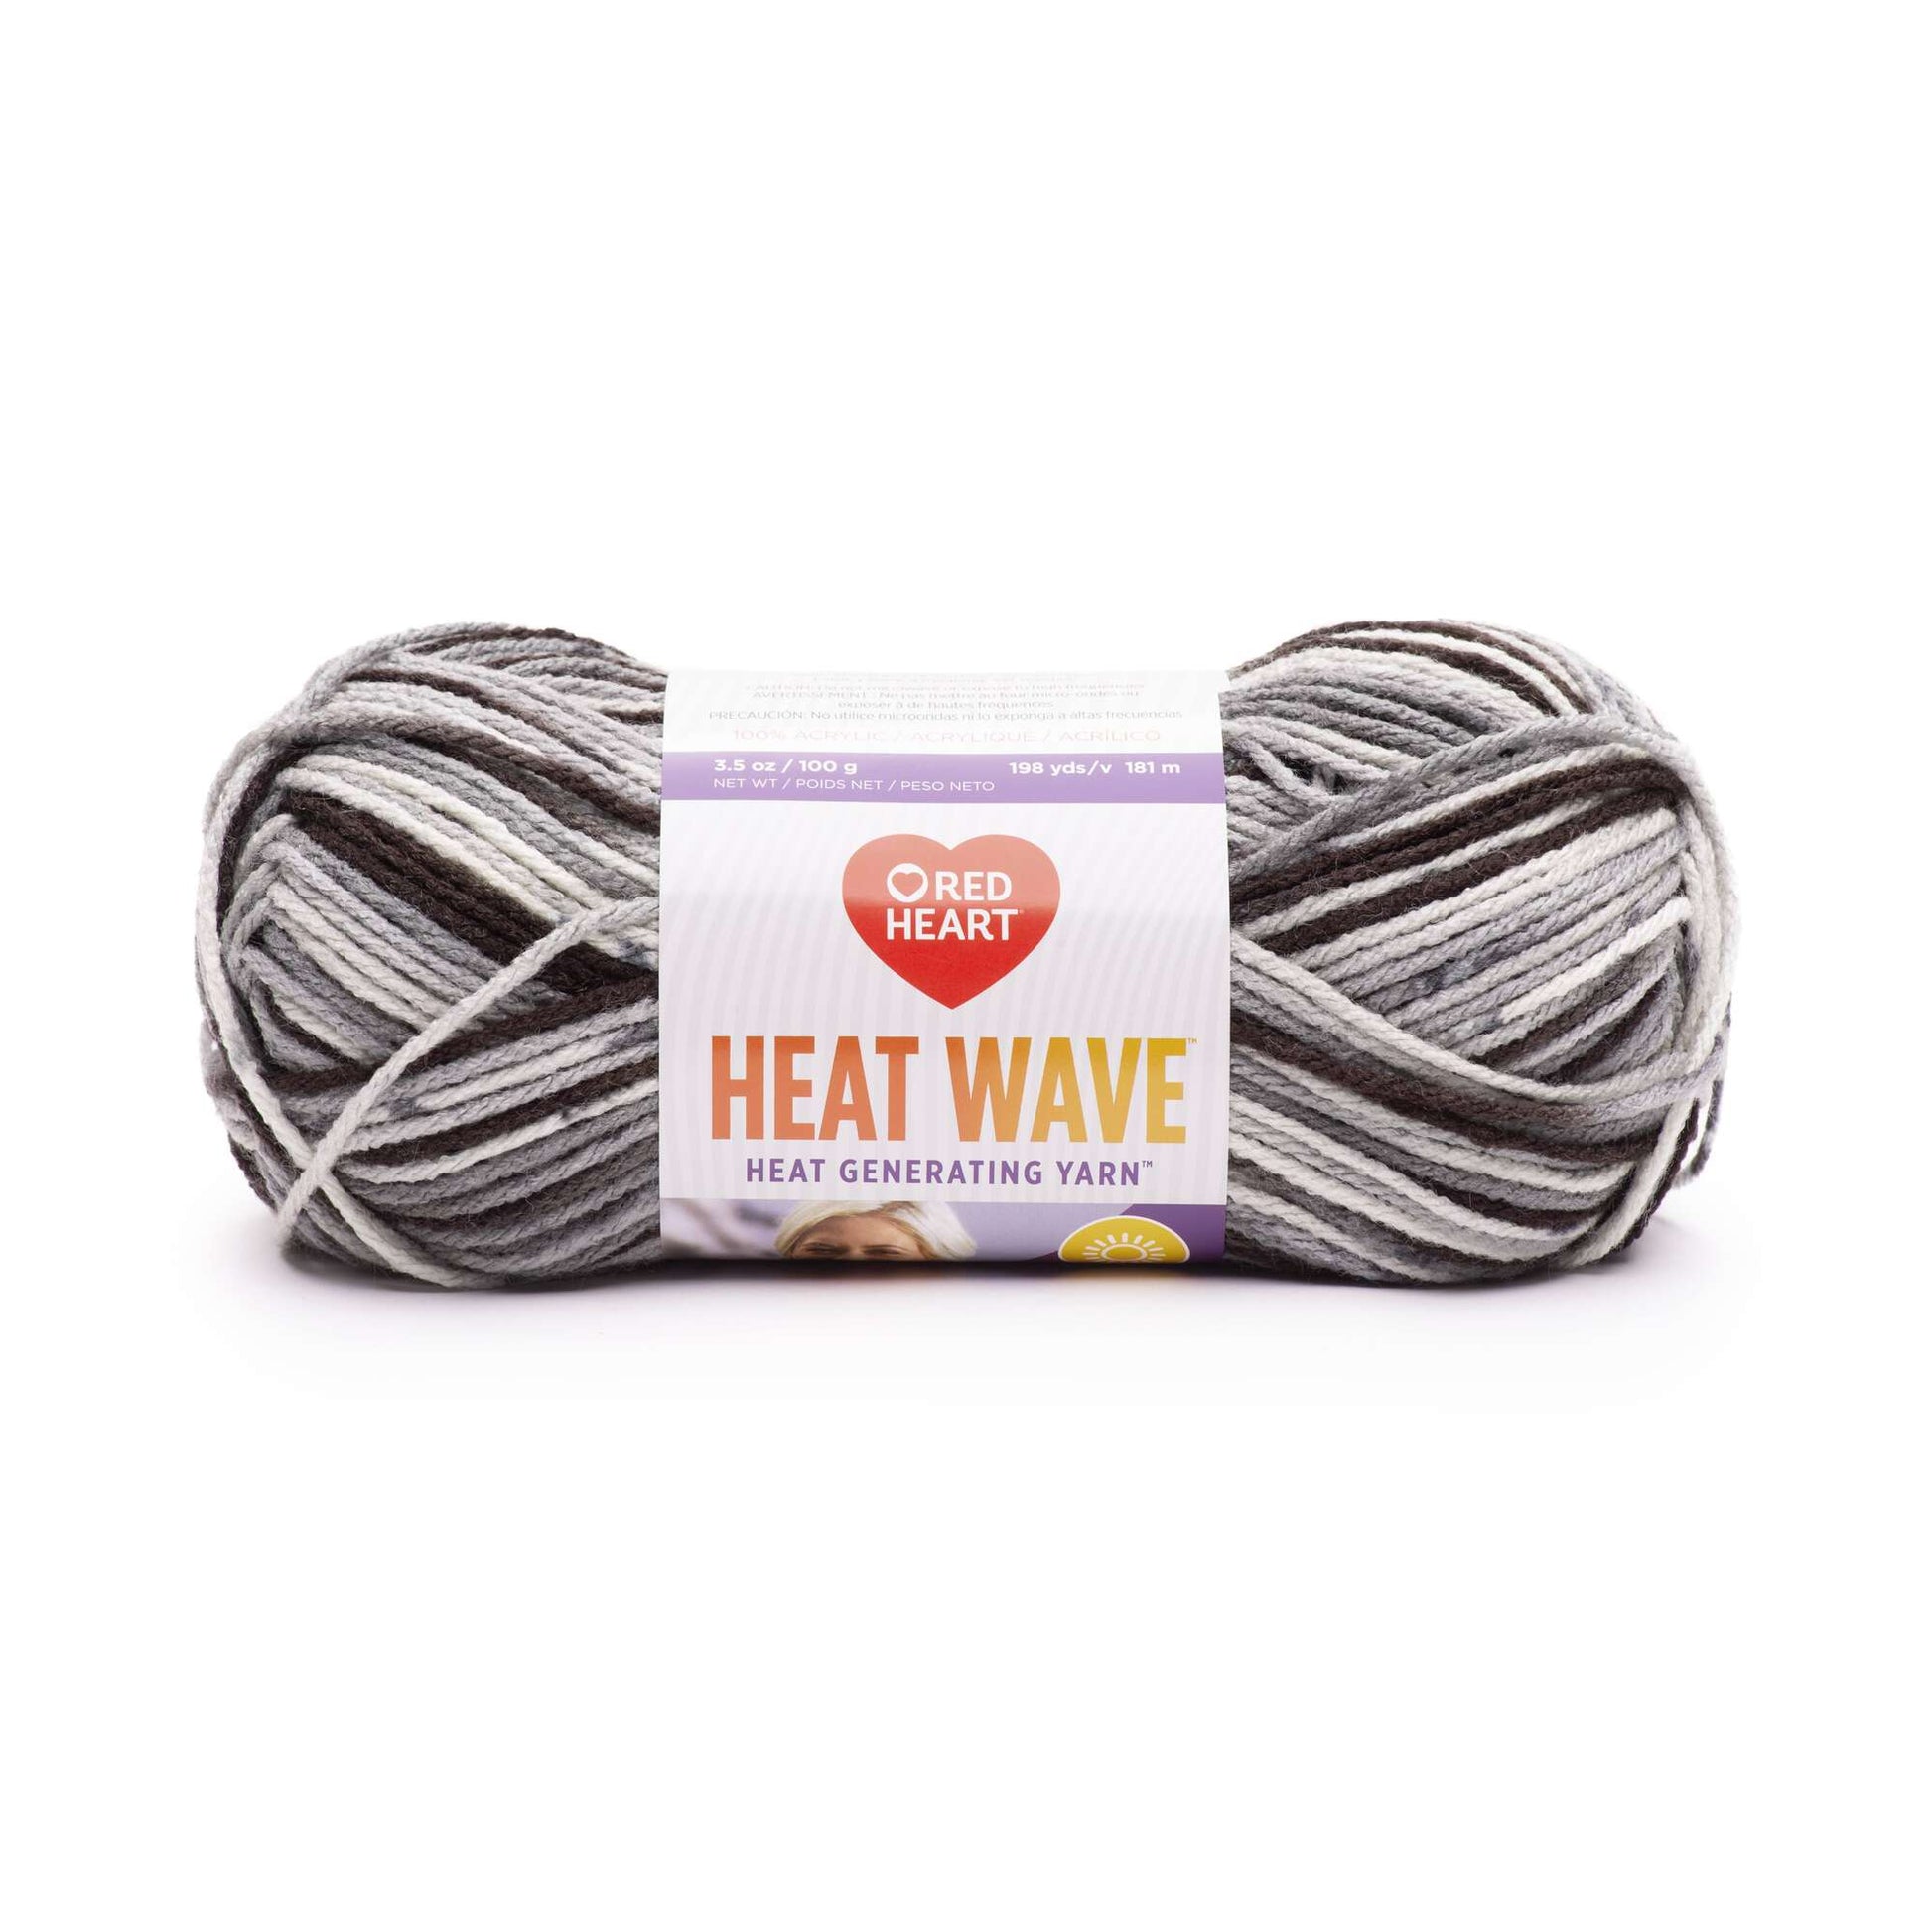 Red Heart Heat Wave Yarn - Discontinued shades Thunderstorm